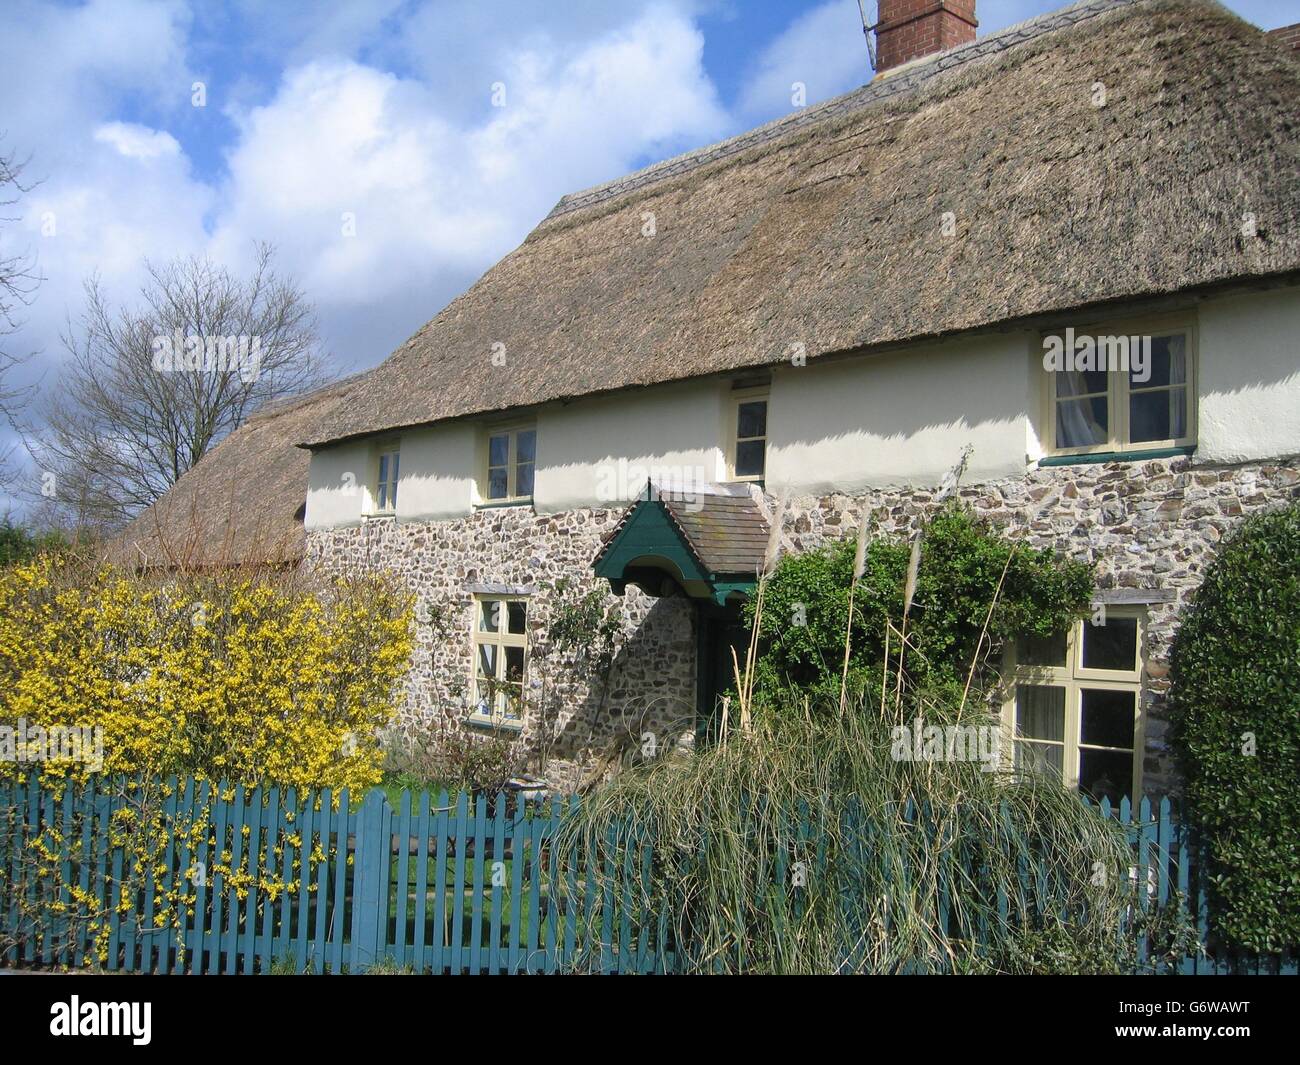 Nick Agg-Manning, 52, an events manager, has lived in Eveleighs Farm House (pictured here) at Gittisham, East Devon for nine years with wife Sarah. He estimates the four-bedroom thatched cottage will have a guide price of 350,000 which he can not afford. Stock Photo